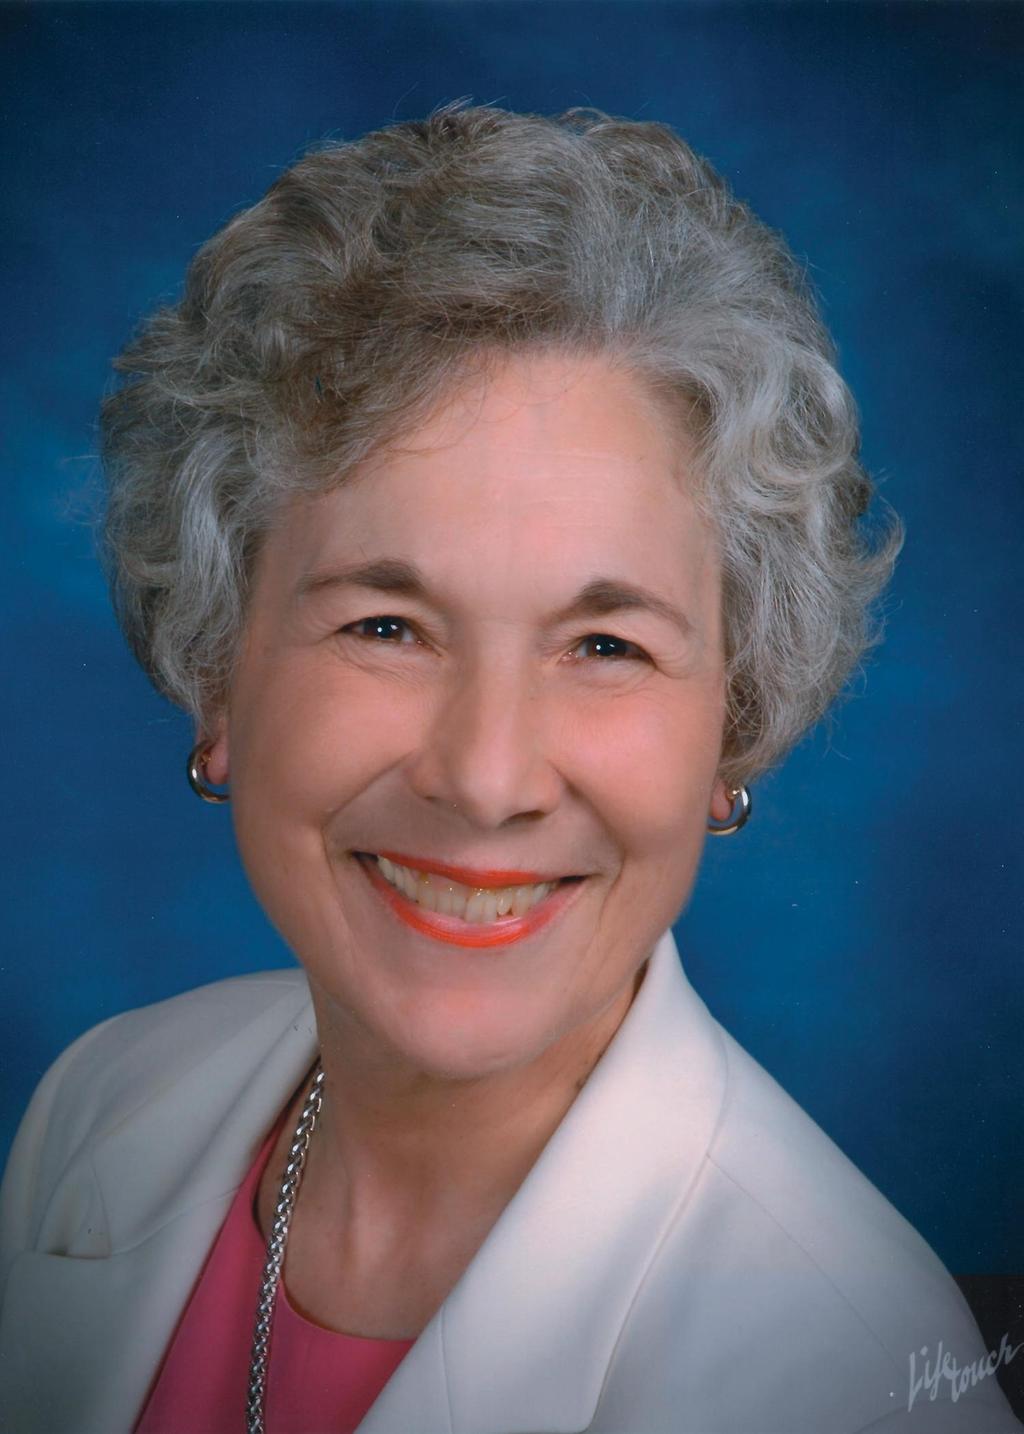 Marilyn Keiser is Chancellor s Professor of Music Emeritus at Jacobs School of Music, Indiana University, Bloomington, where she taught courses in sacred music and applied organ for 25 years.